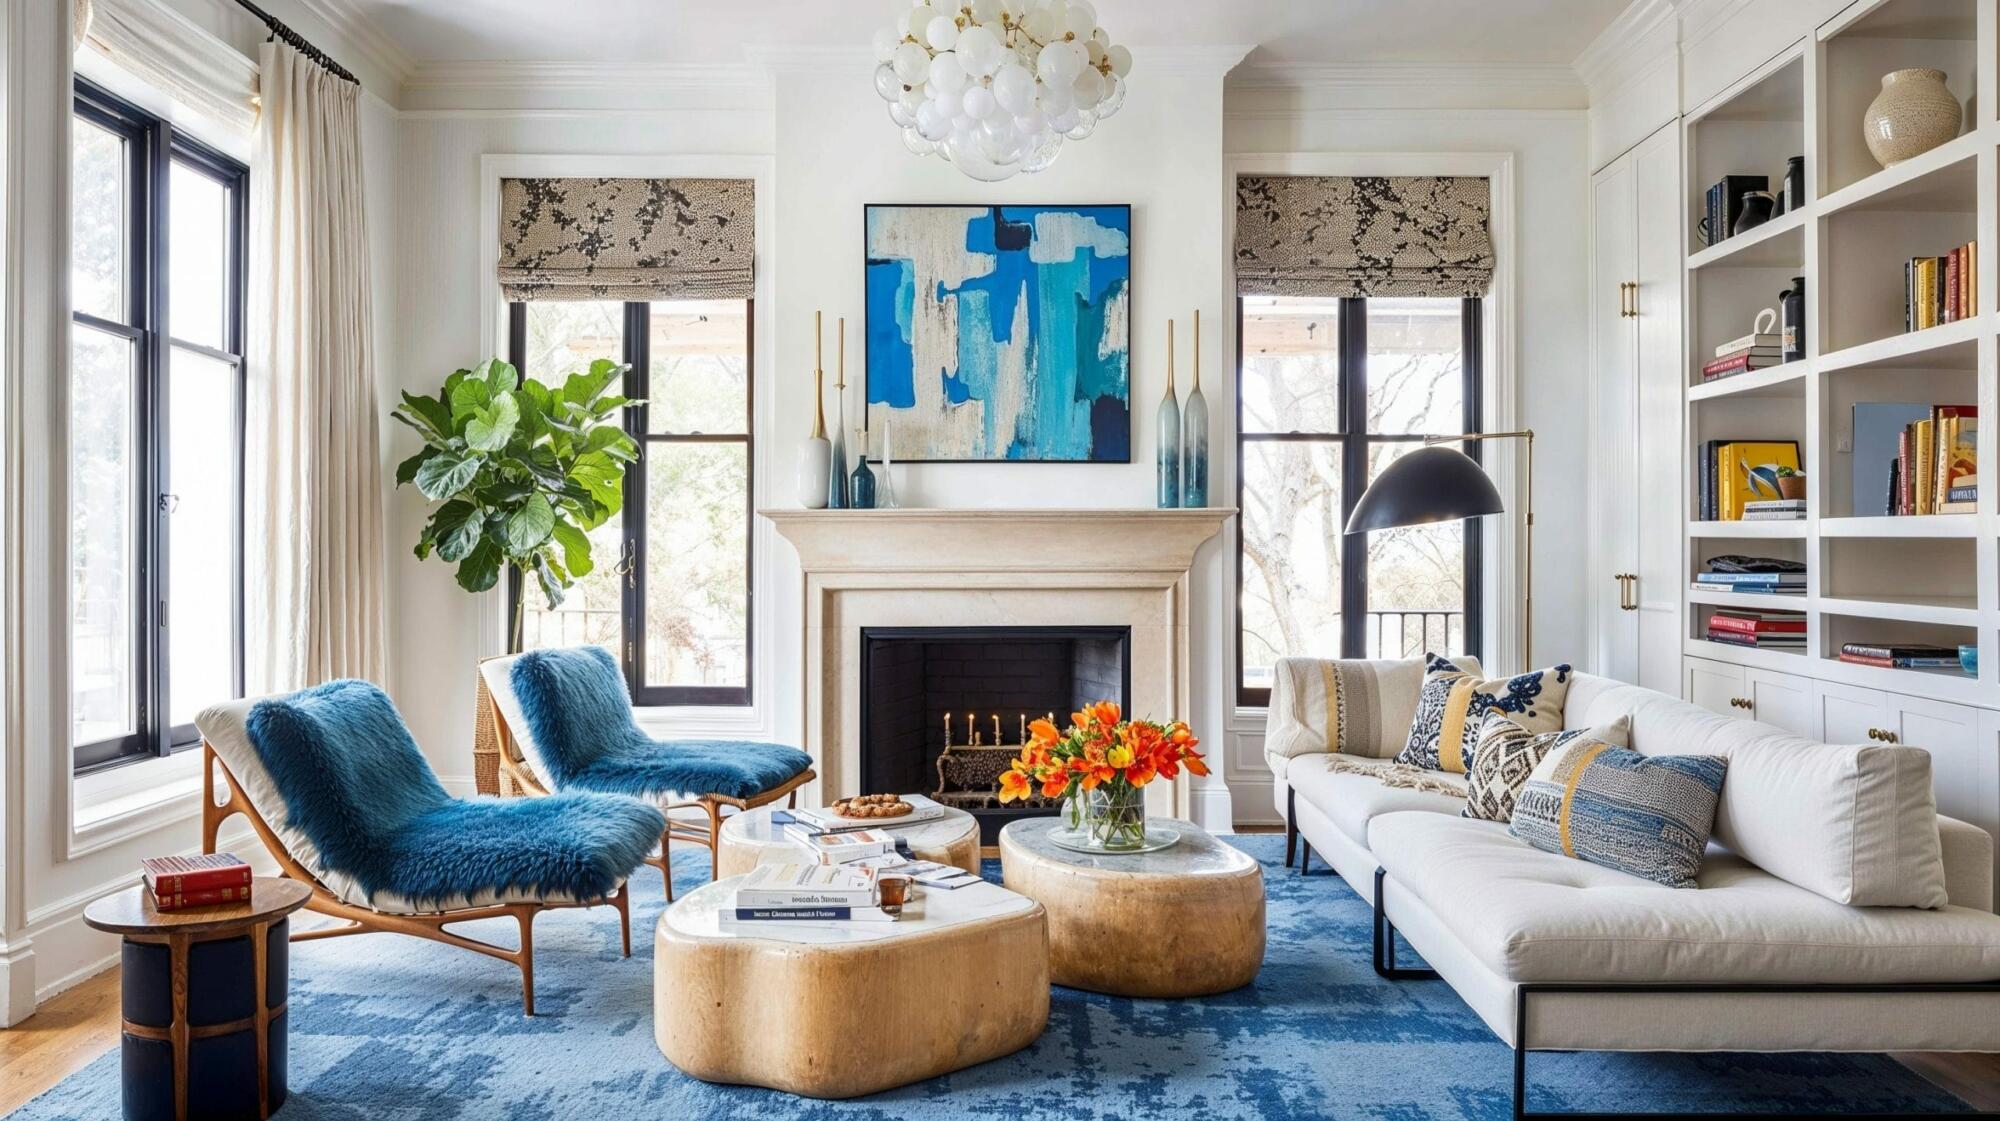 Stylish living room with blue accents and fireplace